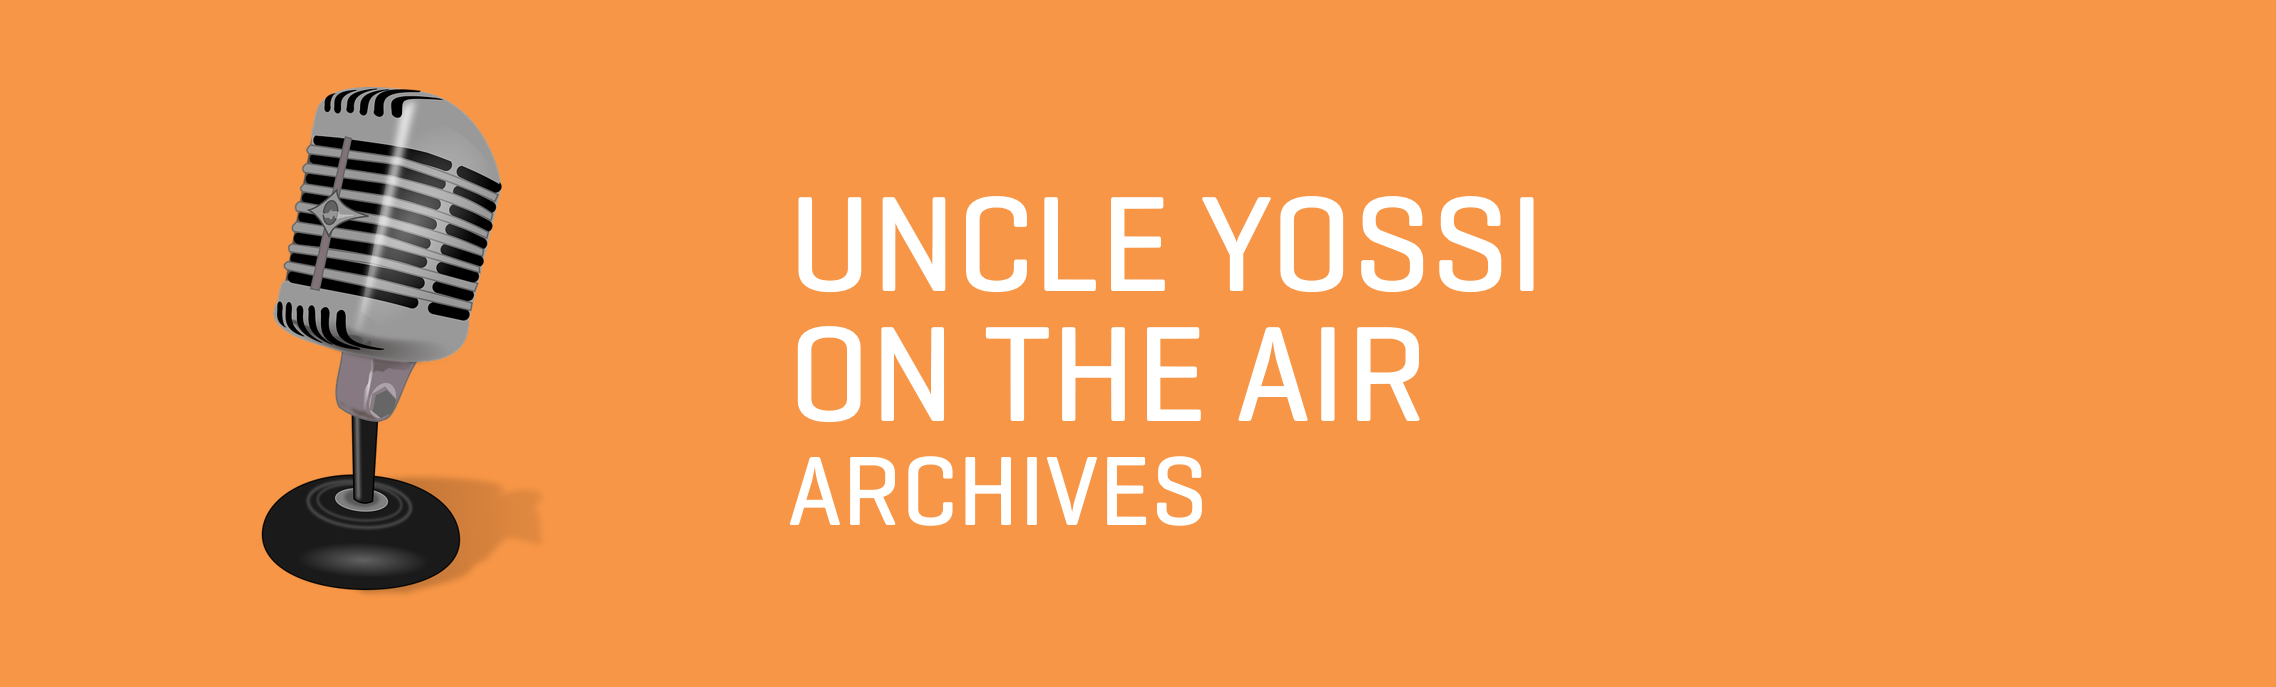 Uncle Yossi on the Air